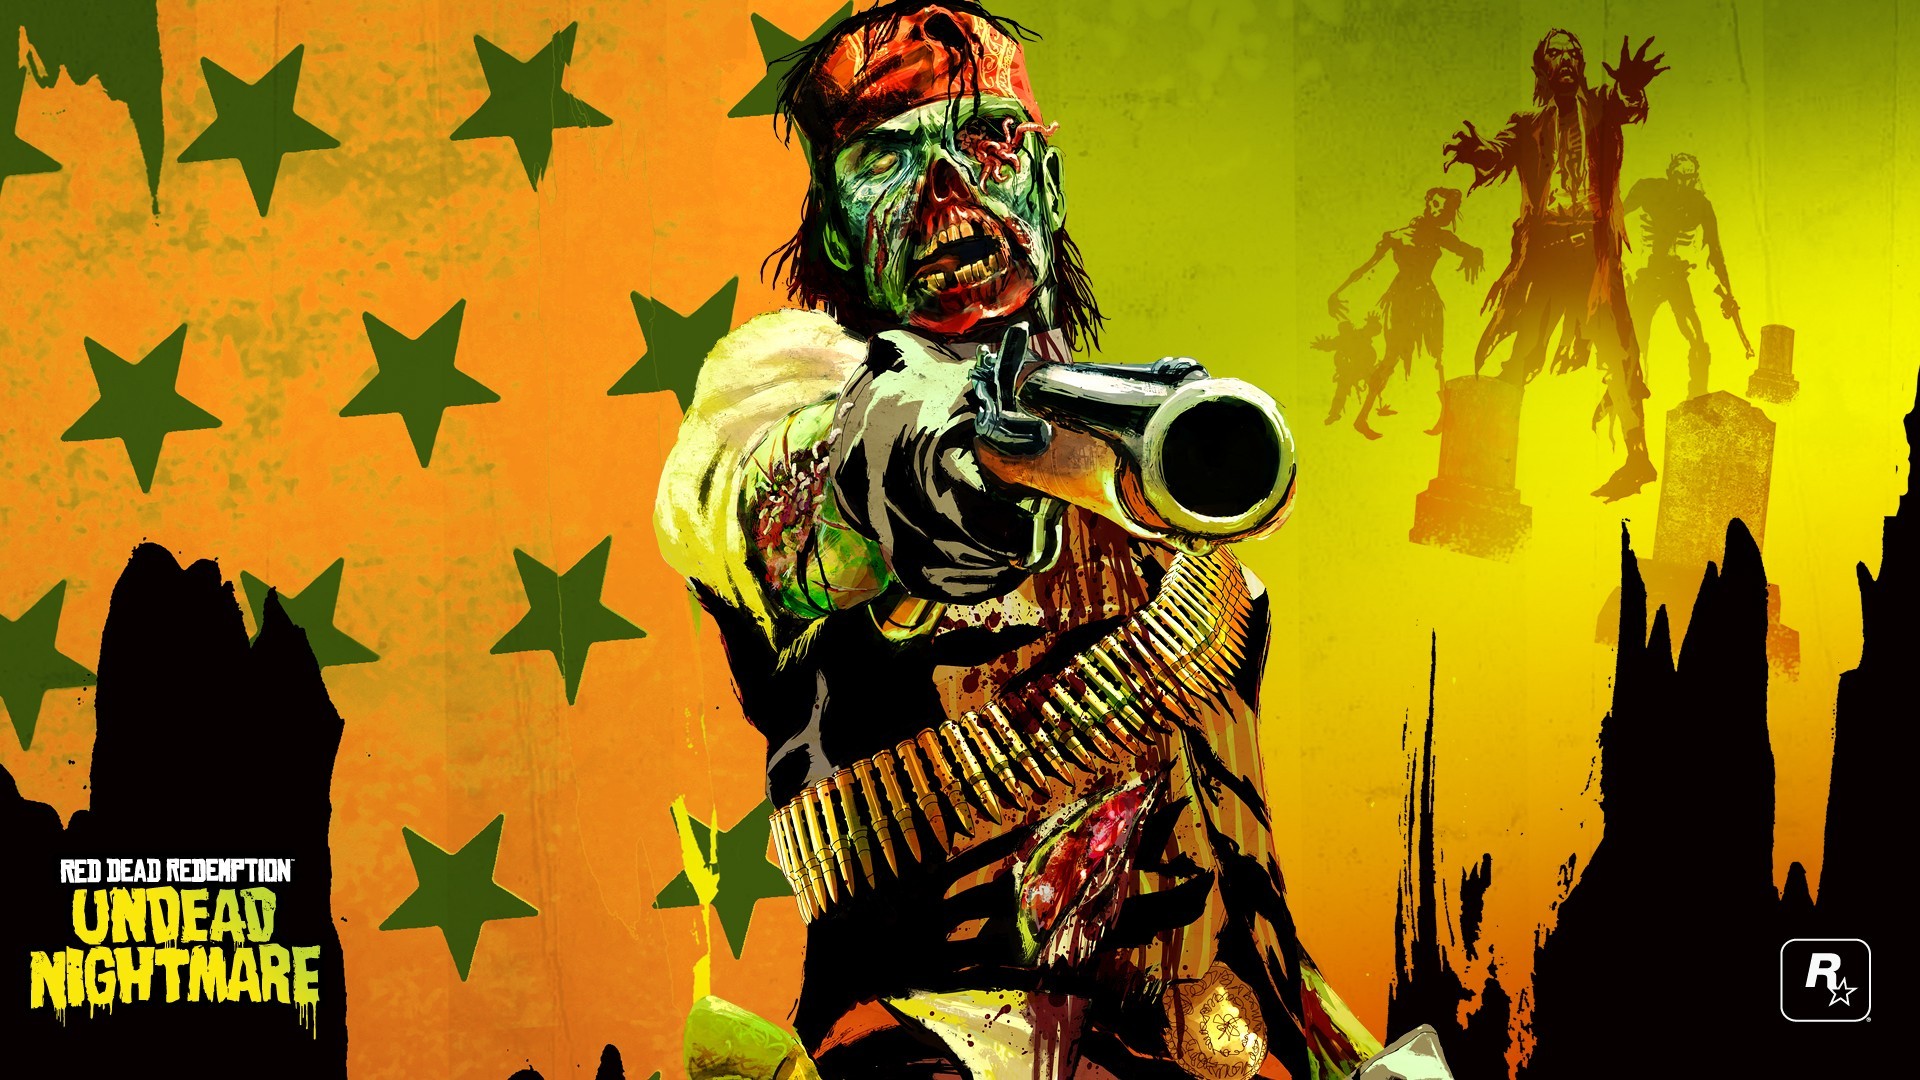 General 1920x1080 Red Dead Redemption video games Red Dead Redemption: Undead Nightmare gun zombies weapon undead video game art PC gaming Rockstar Games